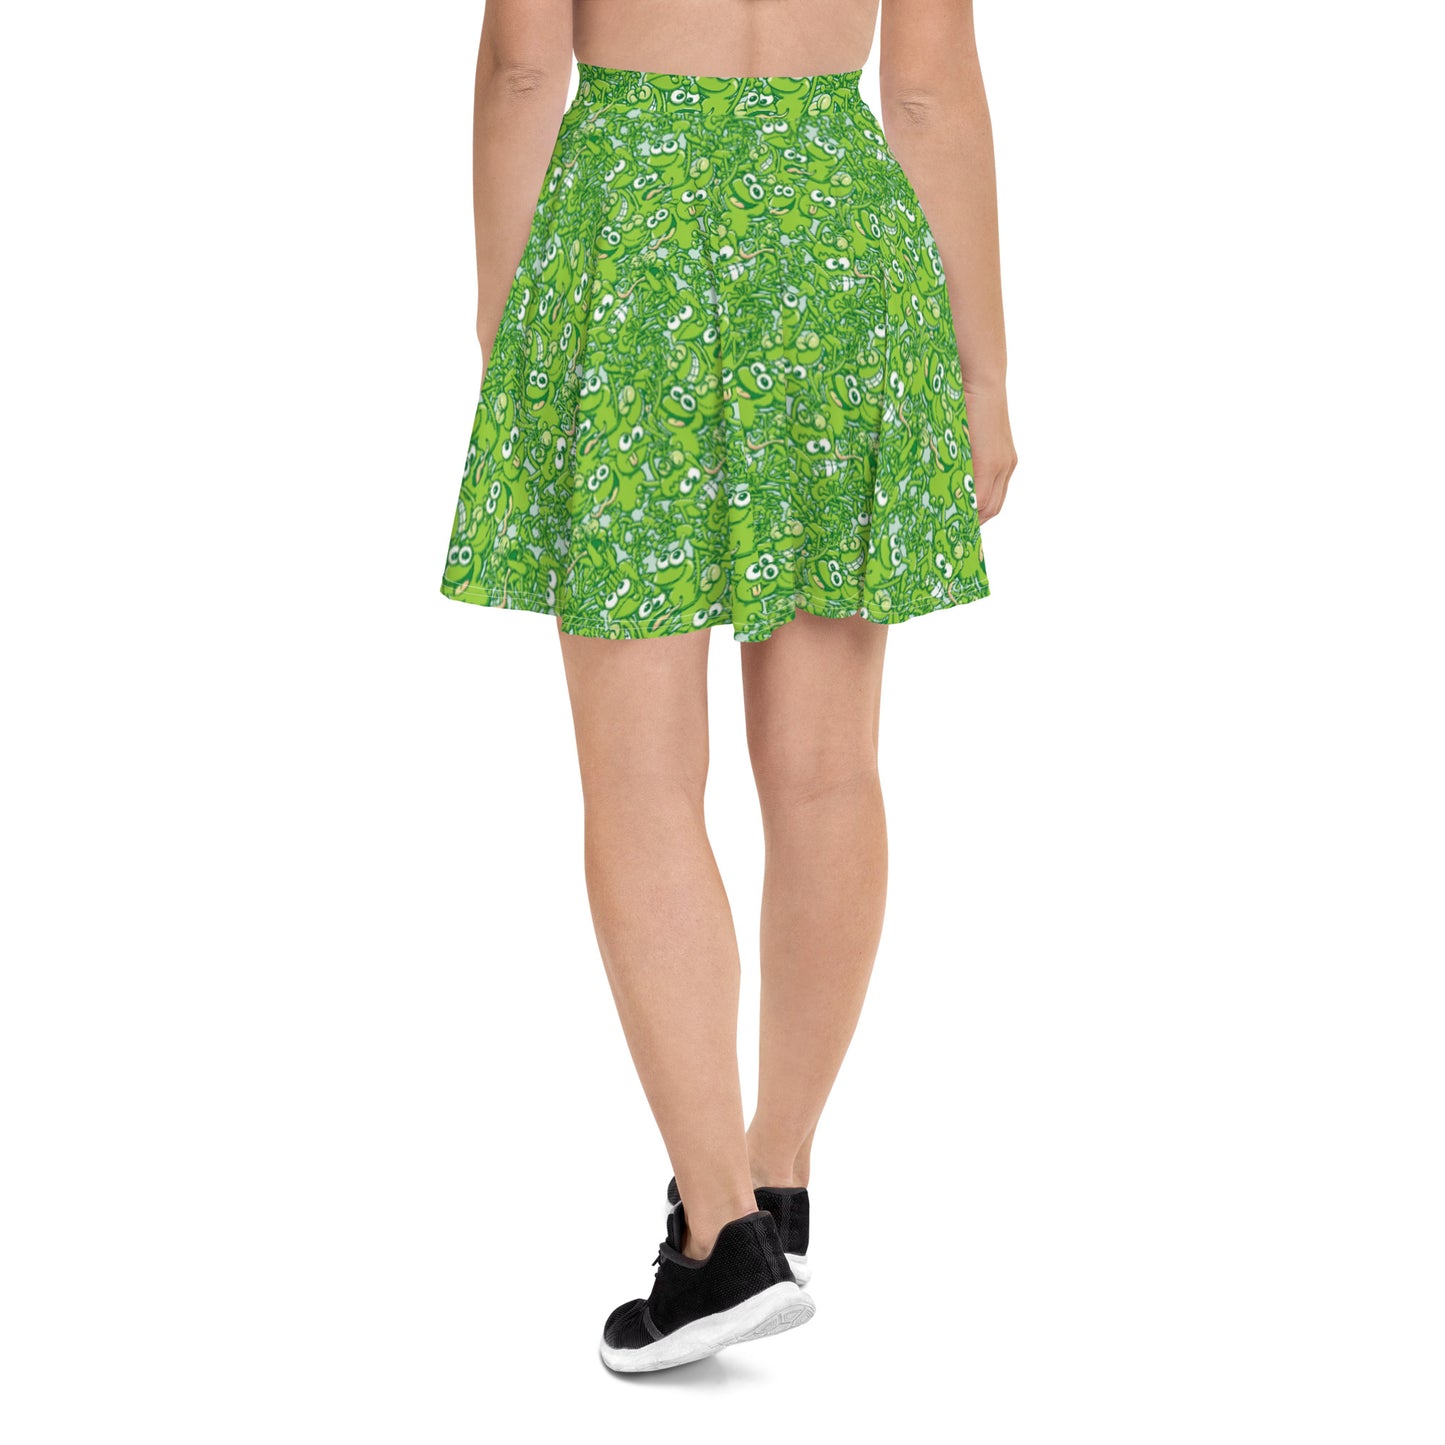 A tangled army of happy green frogs appears when the rain stops Skater Skirt. Back view